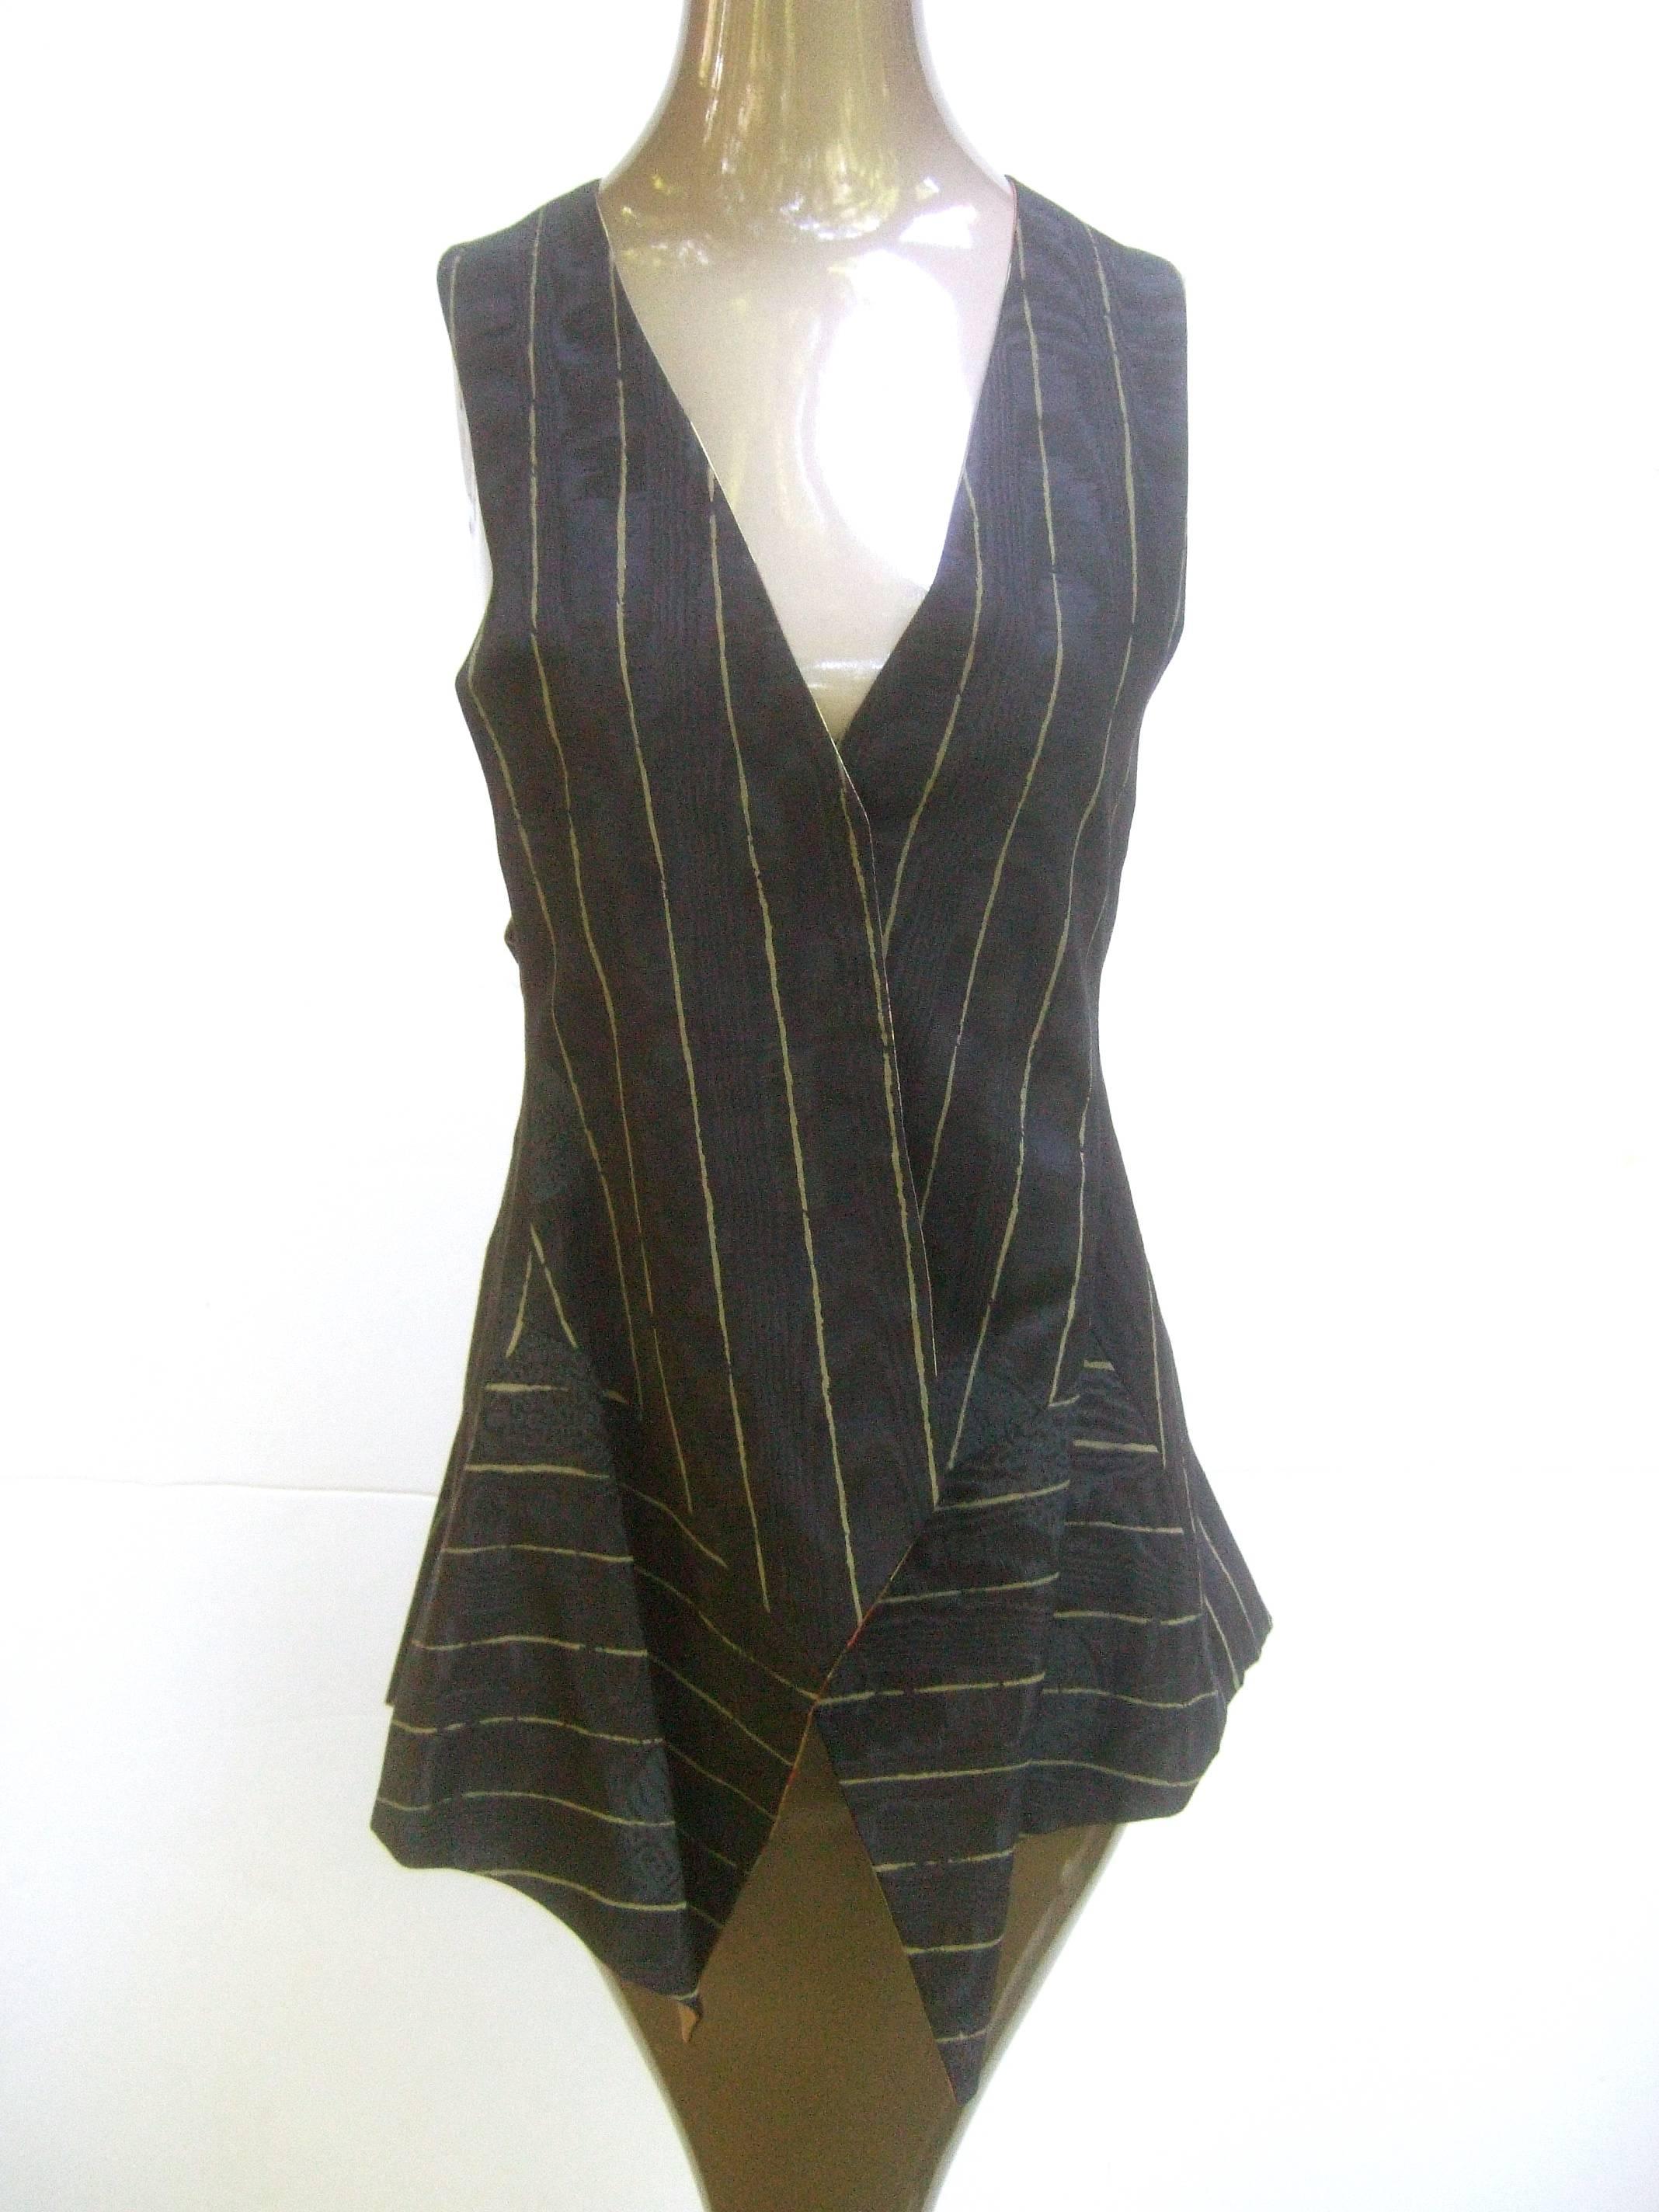 Zandra Rhodes Avant garde black & gold pinstriped vest 
The edgy artisan vest is designed with a pair of dangling 
pearls on the back side

The unique silhouette is designed with triangular pointed 
edges. The interior is lined in gold metallic